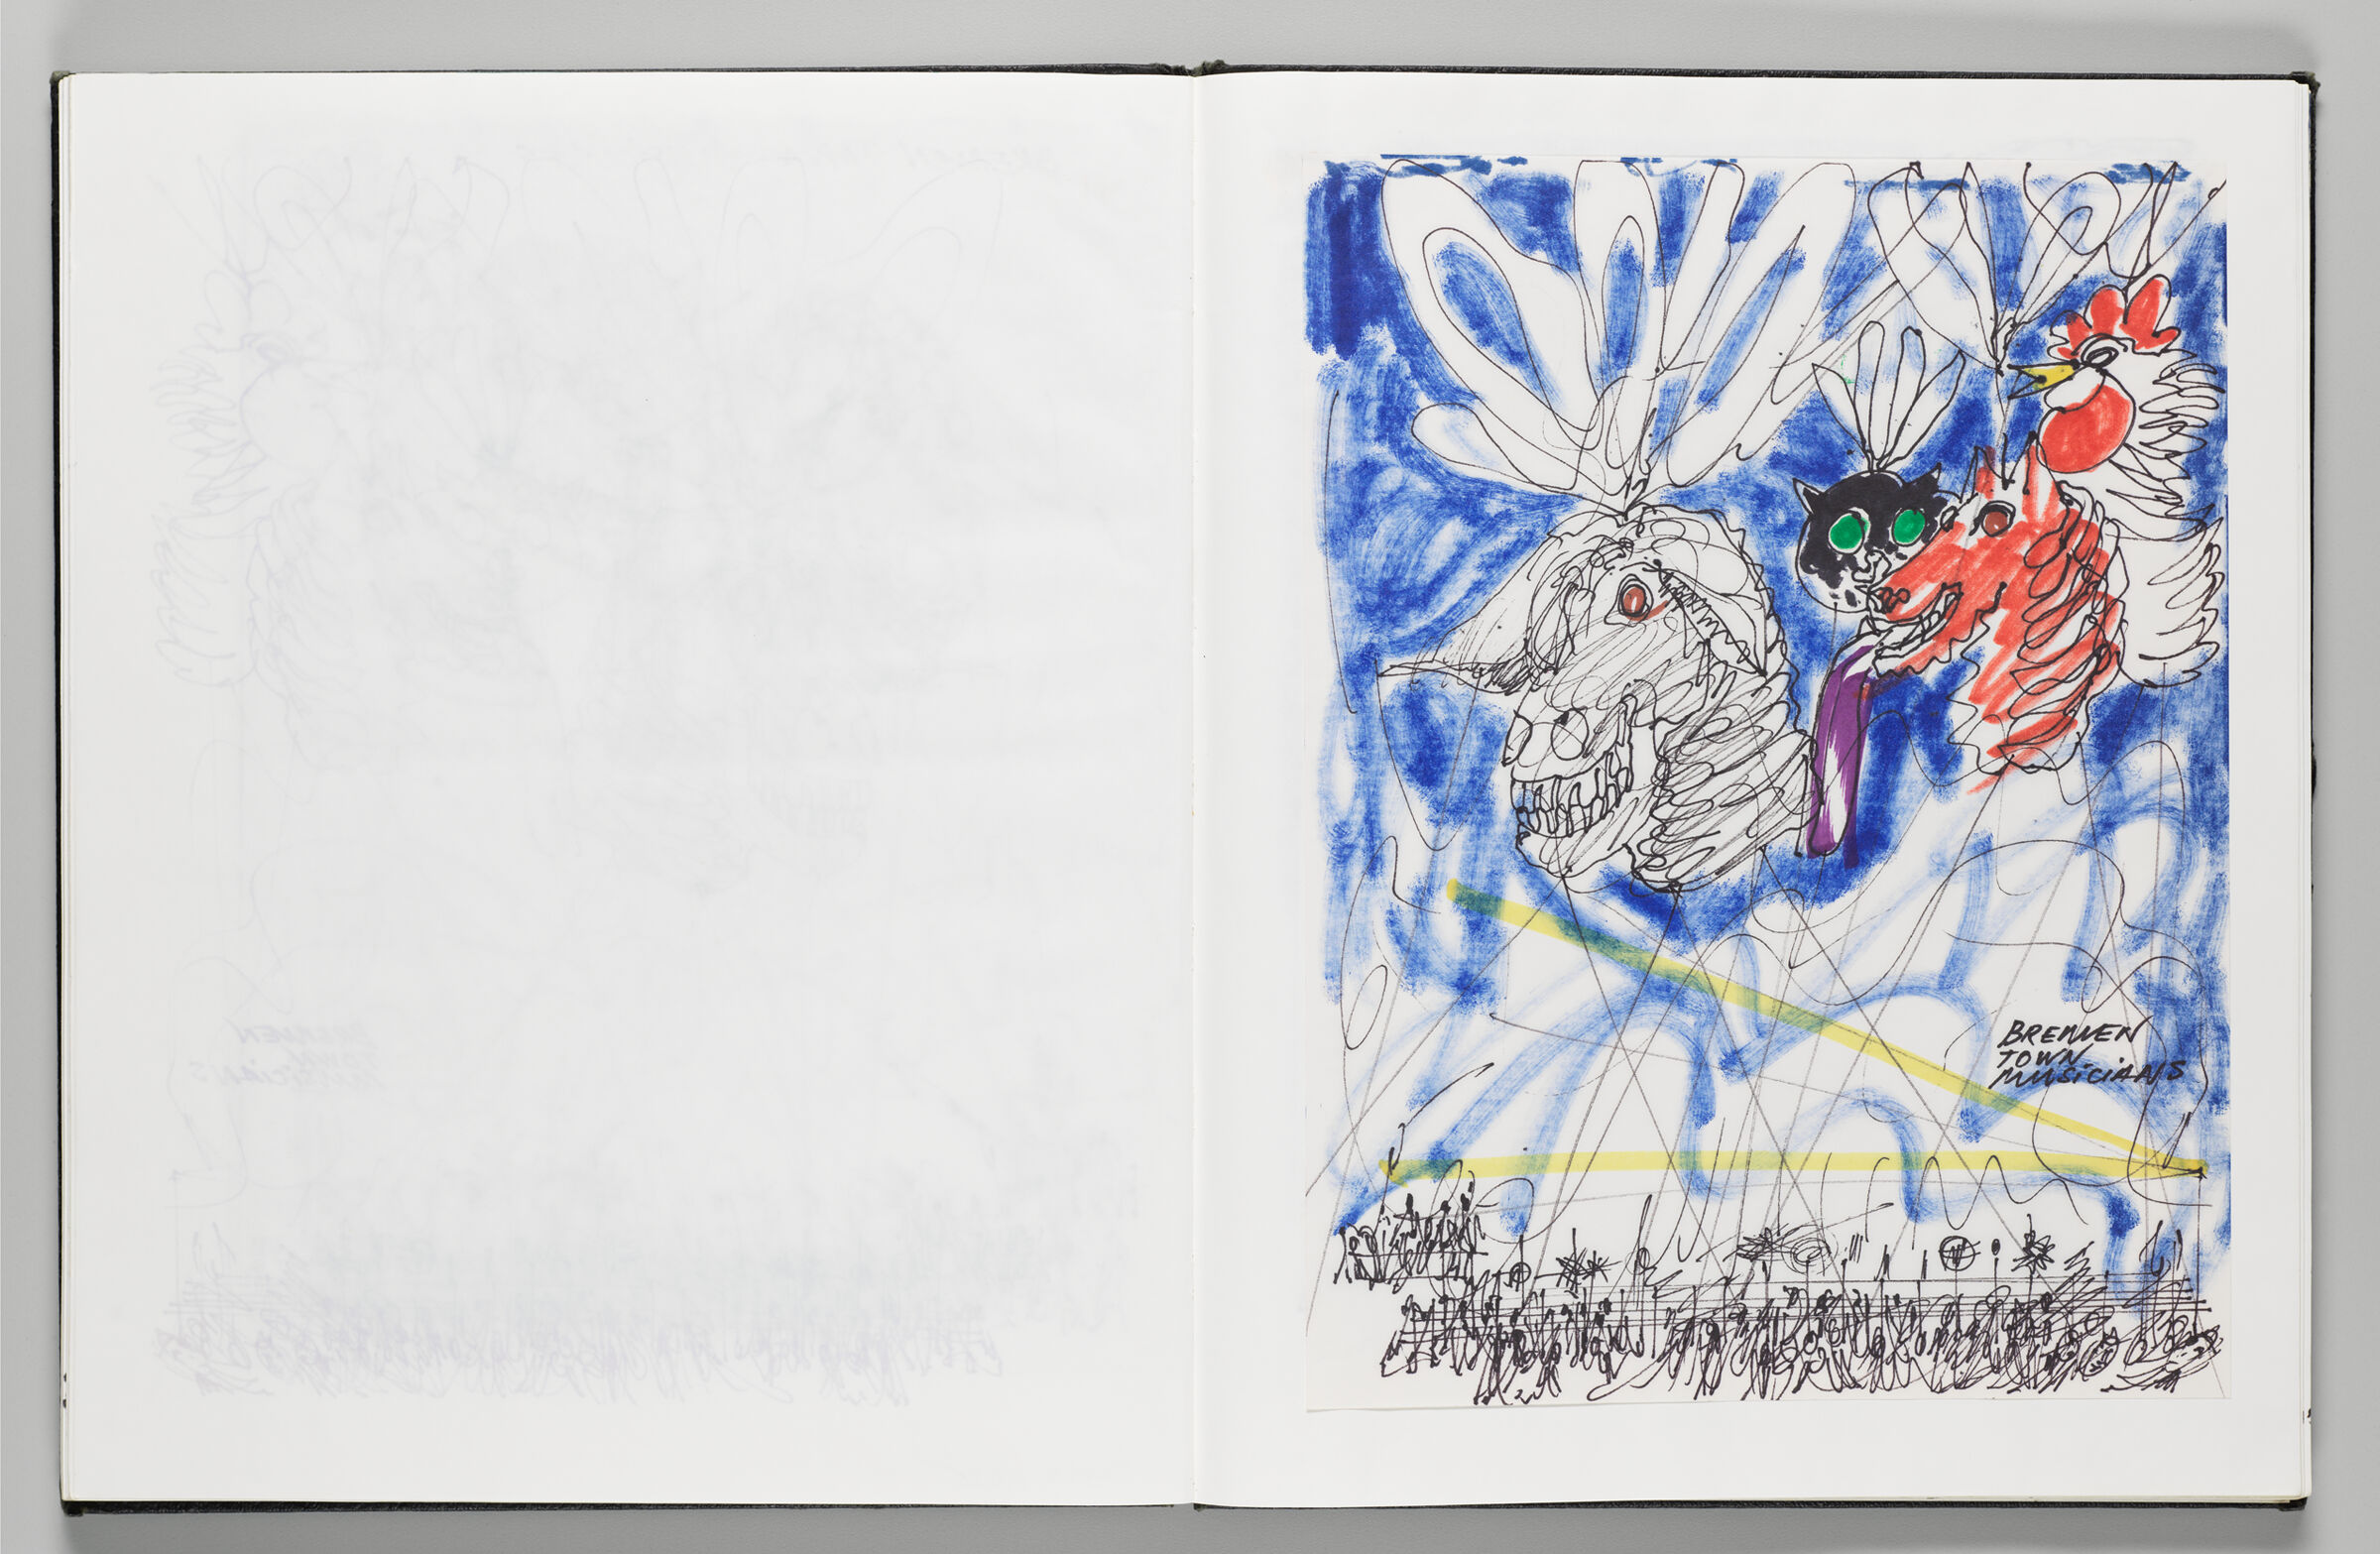 Untitled (Bleed-Through Of Previous Page And Color Transfer, Left Page); Untitled (Pasted-In 